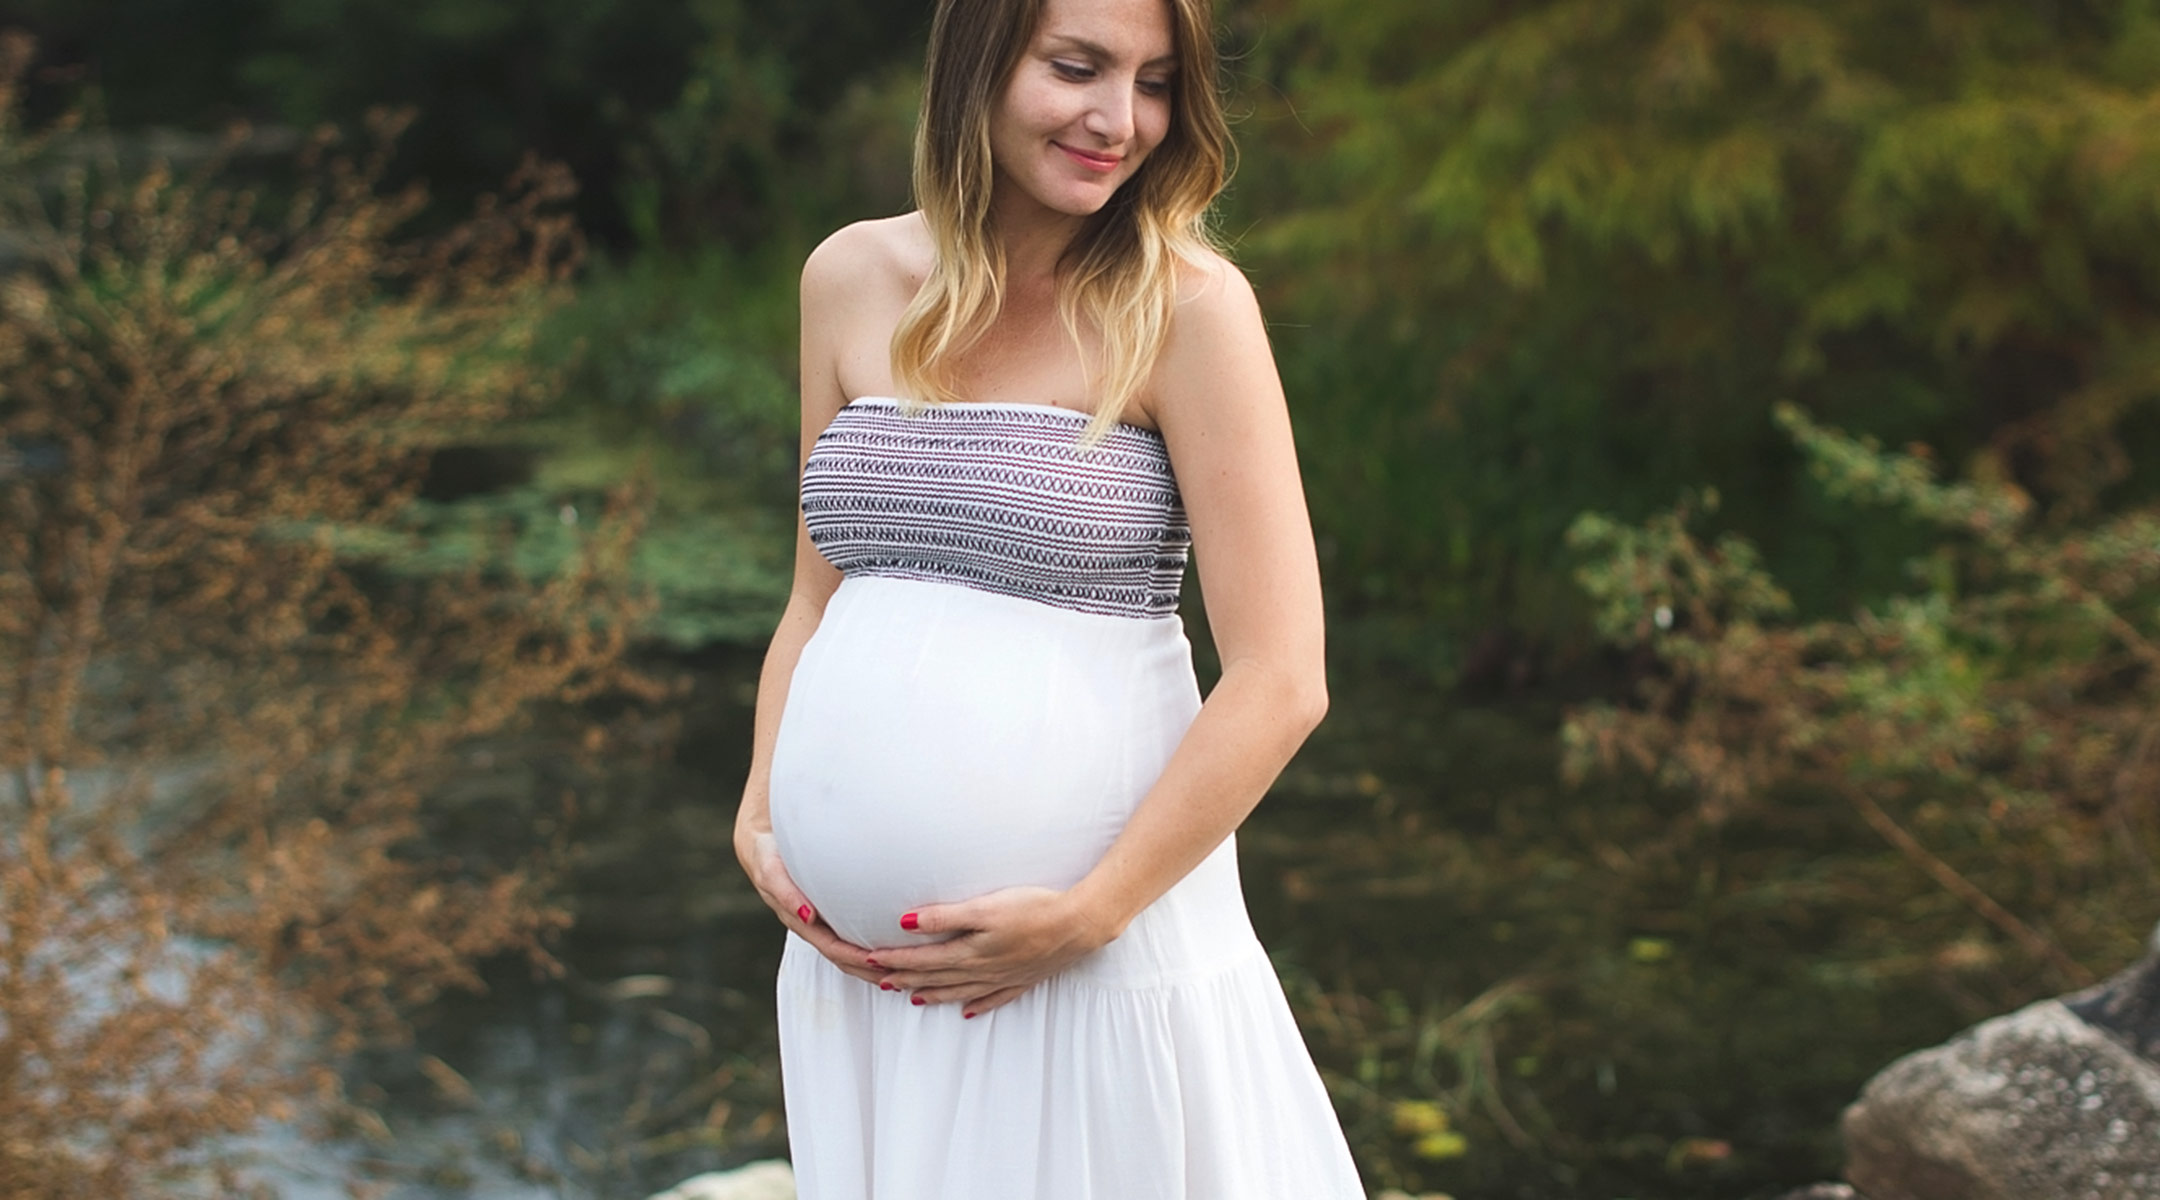 pregnant woman outside in natural setting